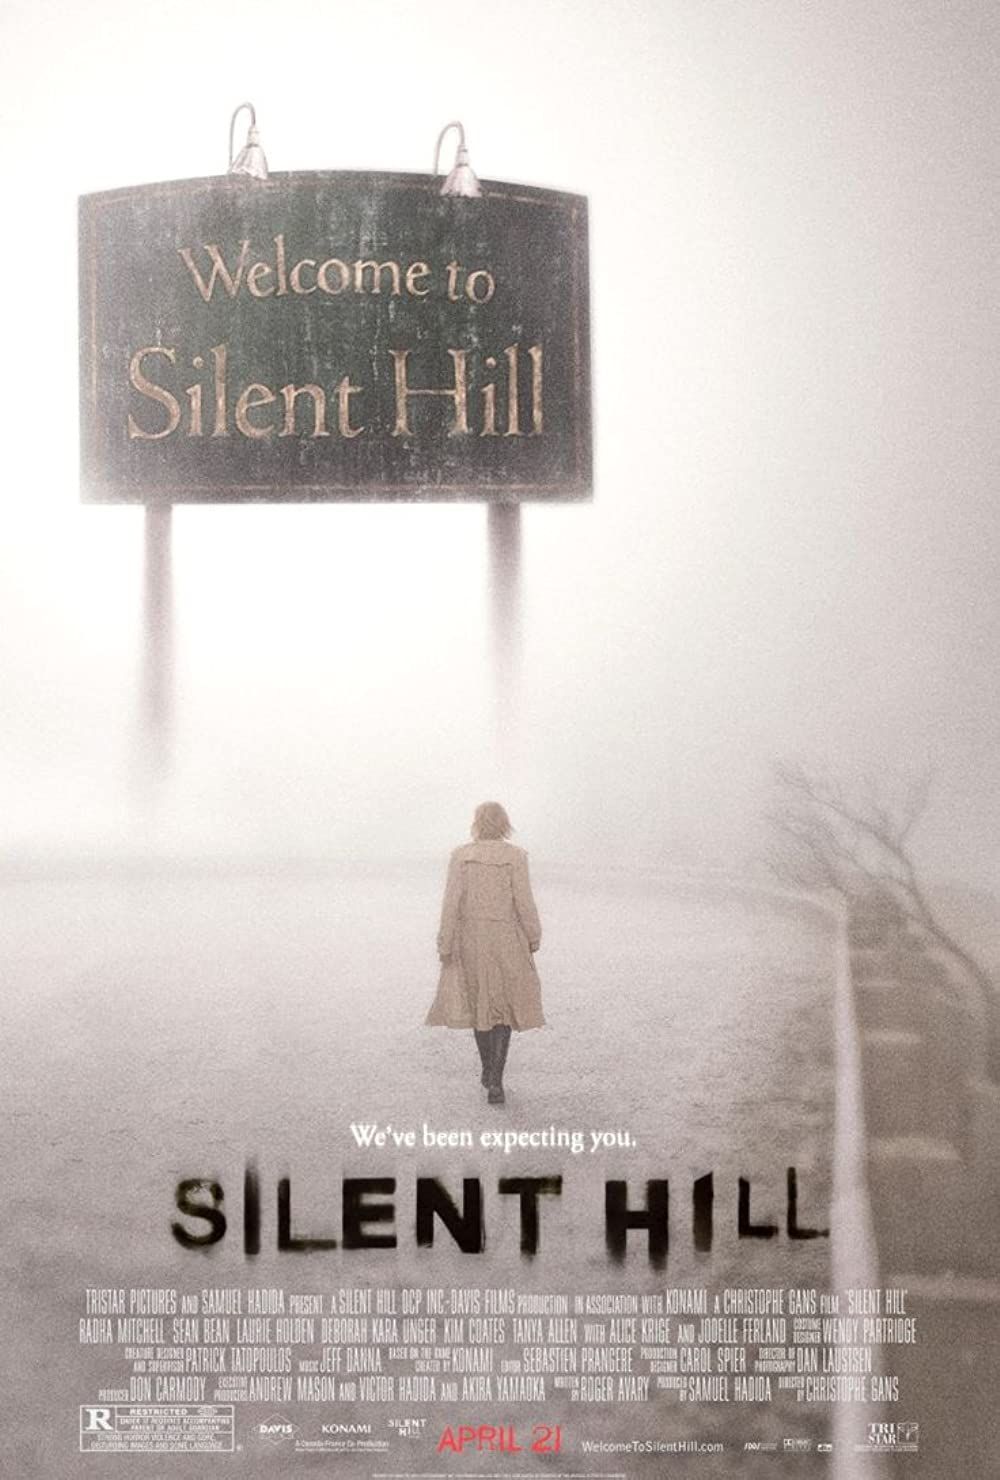 Return to Silent Hill (2022) MovieWeb